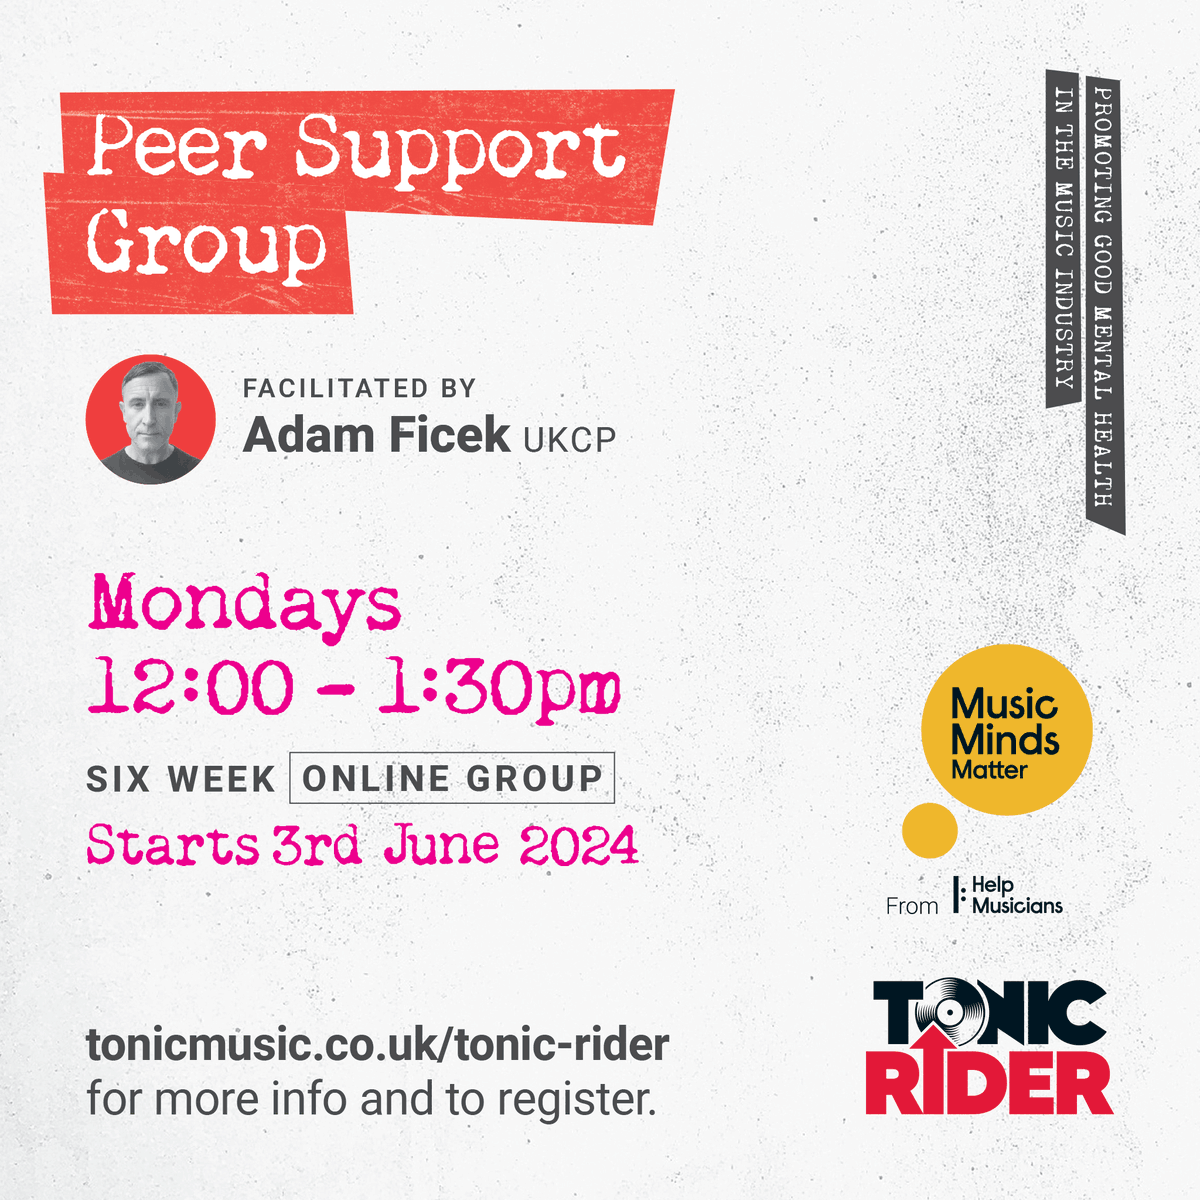 Limited spaces left!

Open to ALL music artists, crew & industry professionals!  

FREE online Peer Support Group - in partnership with @helpmusicians

To register > tonicmusic.co.uk/tonic-rider 

#TonicRider #MusicMindsMatter #MentalHealth #Wellbeing #Music